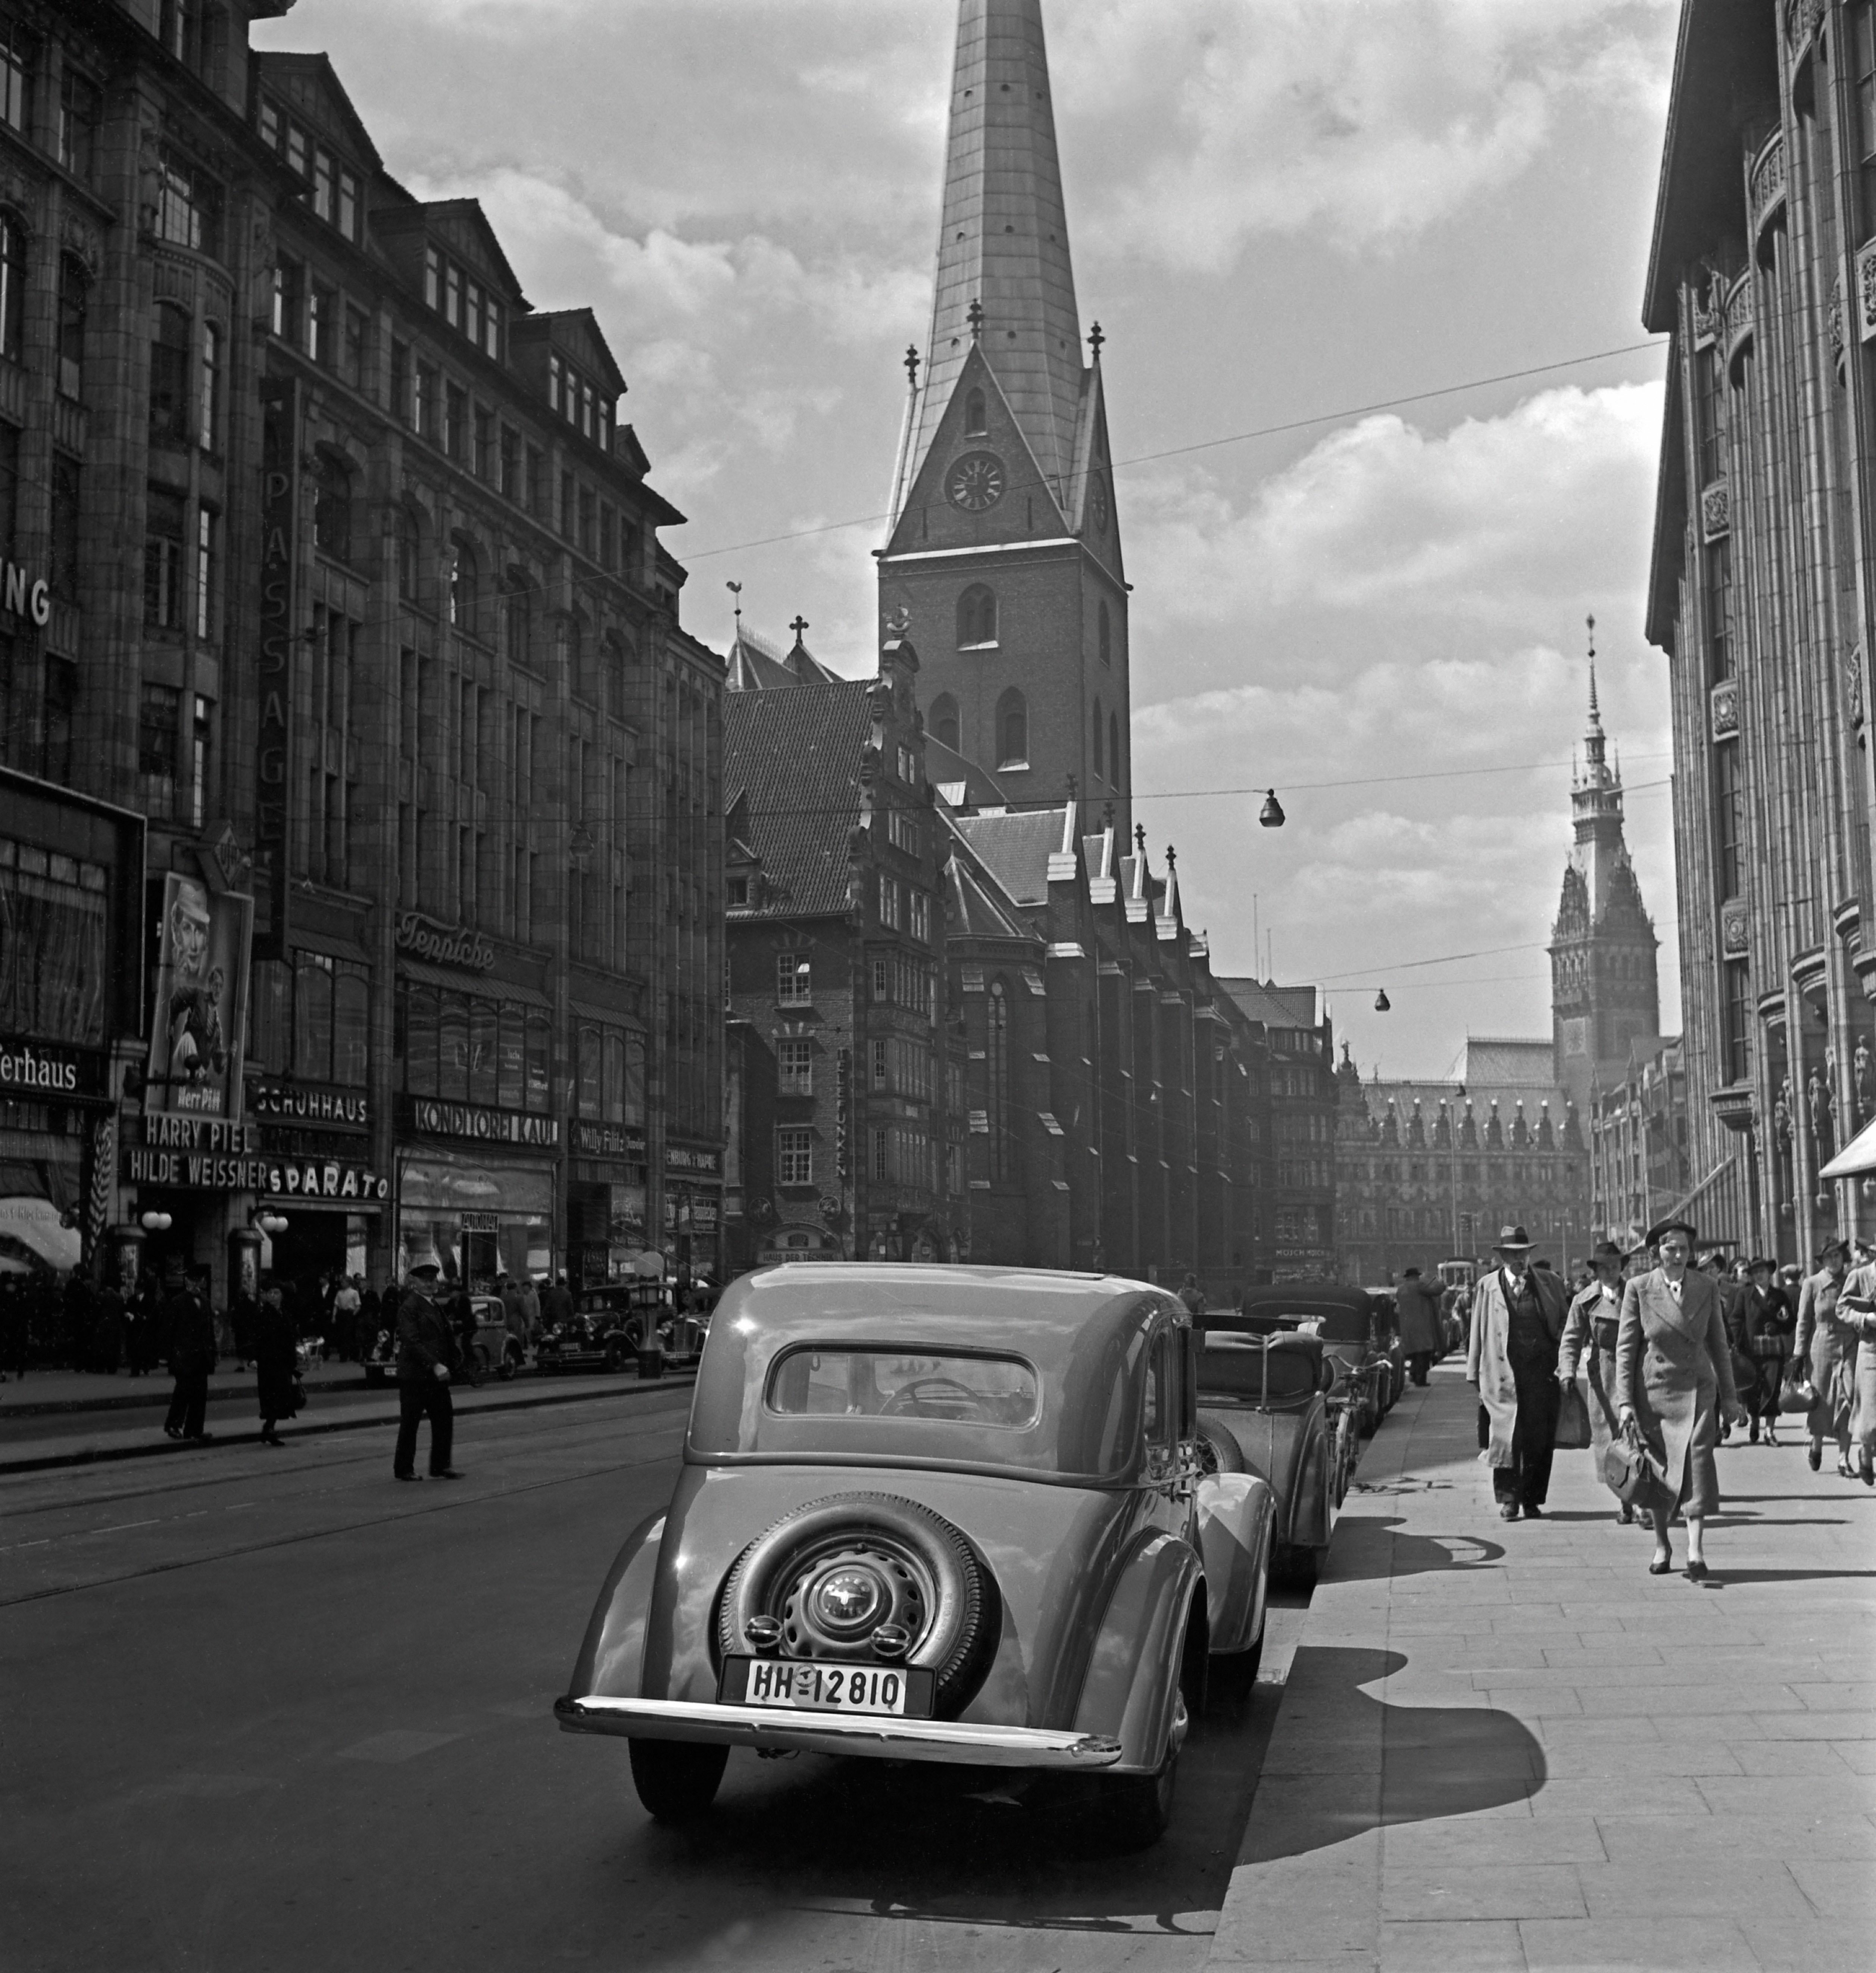 Karl Heinrich Lämmel Black and White Photograph - Moenckebergstrasse Hamburg with cars and people, Germany 1938, Printed Later 